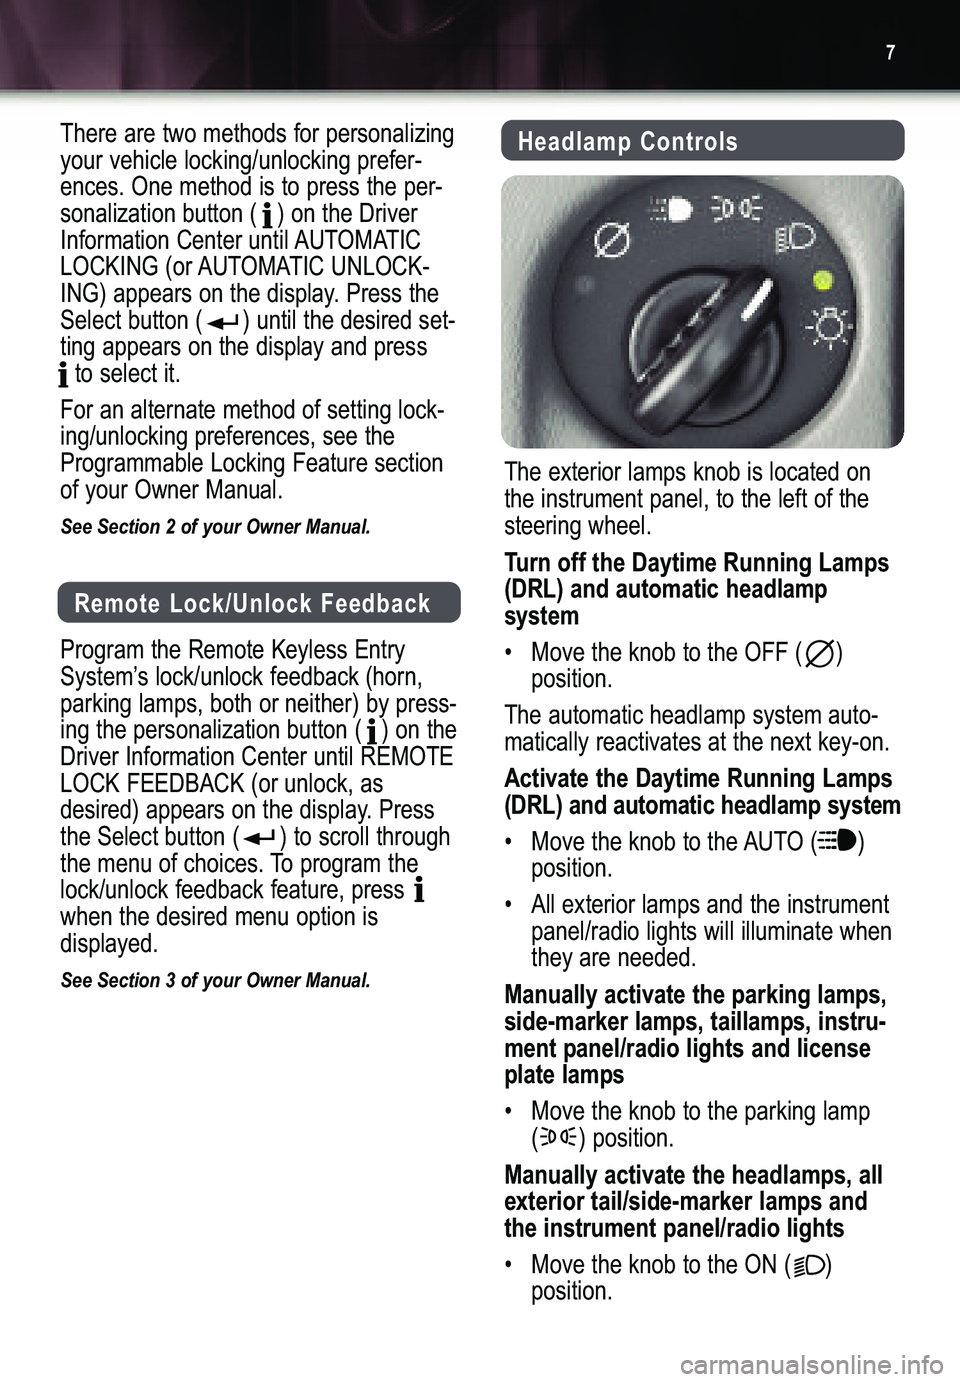 BUICK RAINIER 2005  Get To Know Guide Remote Lock/Unlock Feedback
Program the Remote Keyless Entry
System’s lock/unlock feedback (horn,parking lamps, both or neither) by press�
ing the personalization button (   ) on theDriver Informati